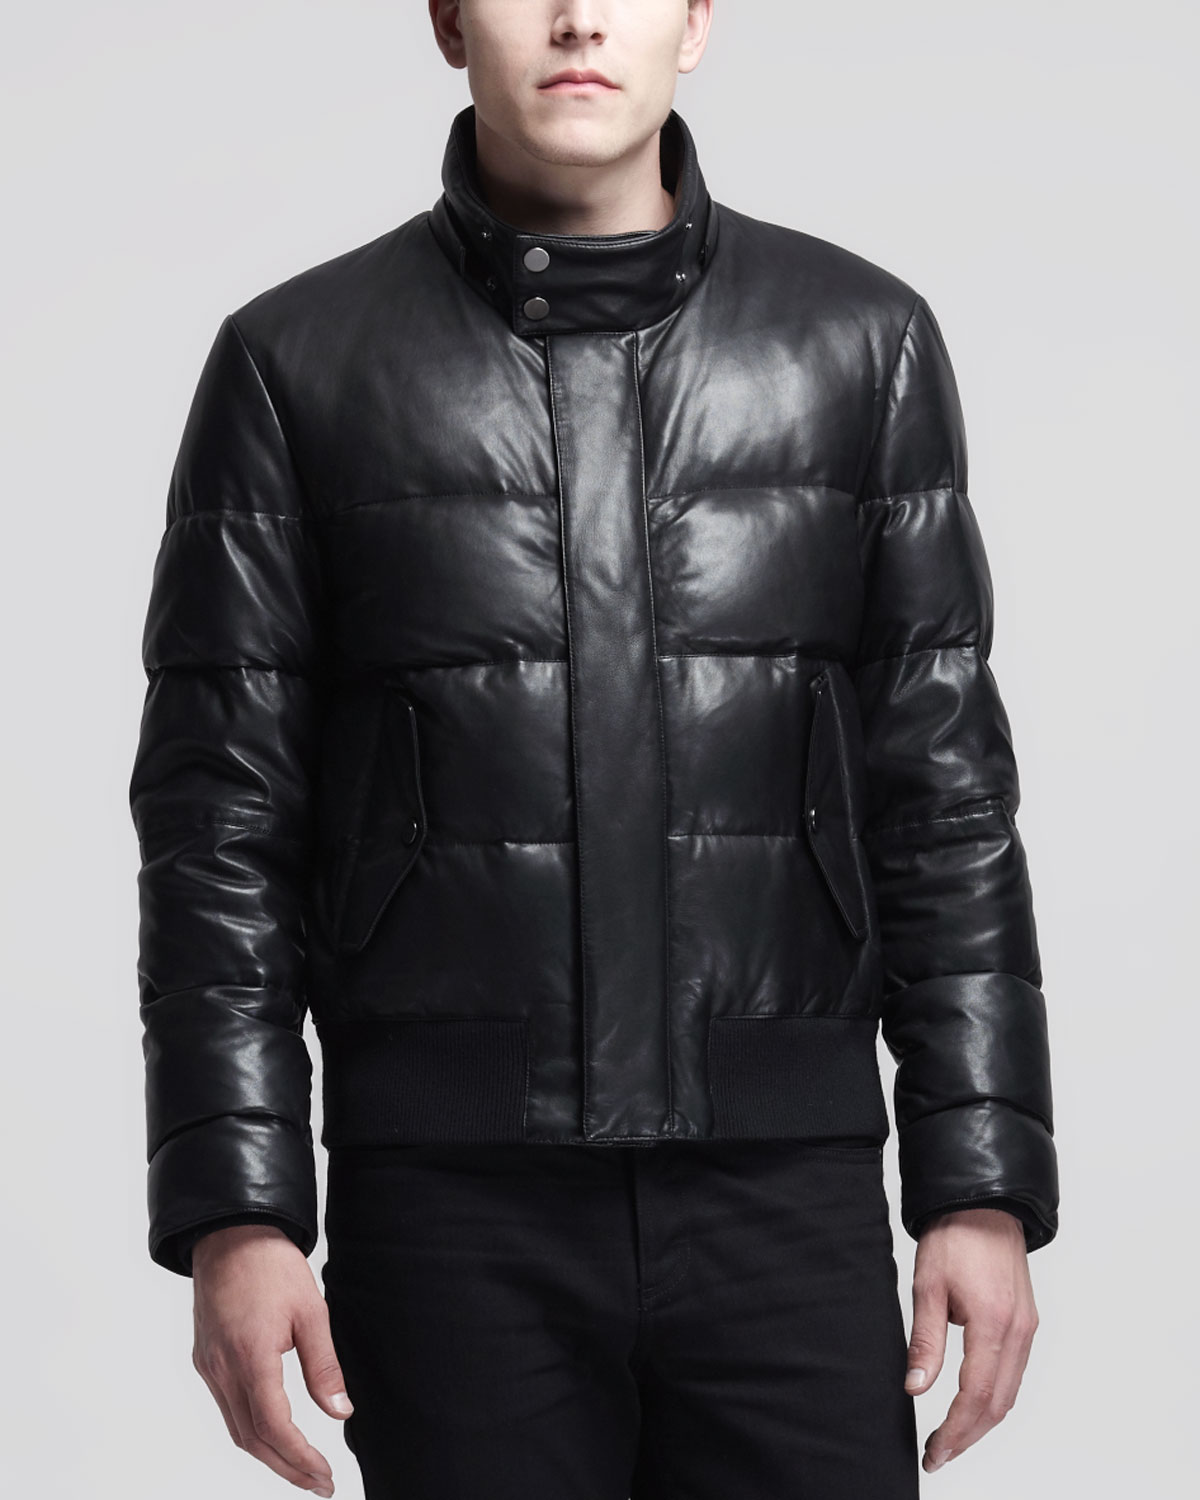 Lyst - Givenchy Leather Puffer Jacket in Black for Men